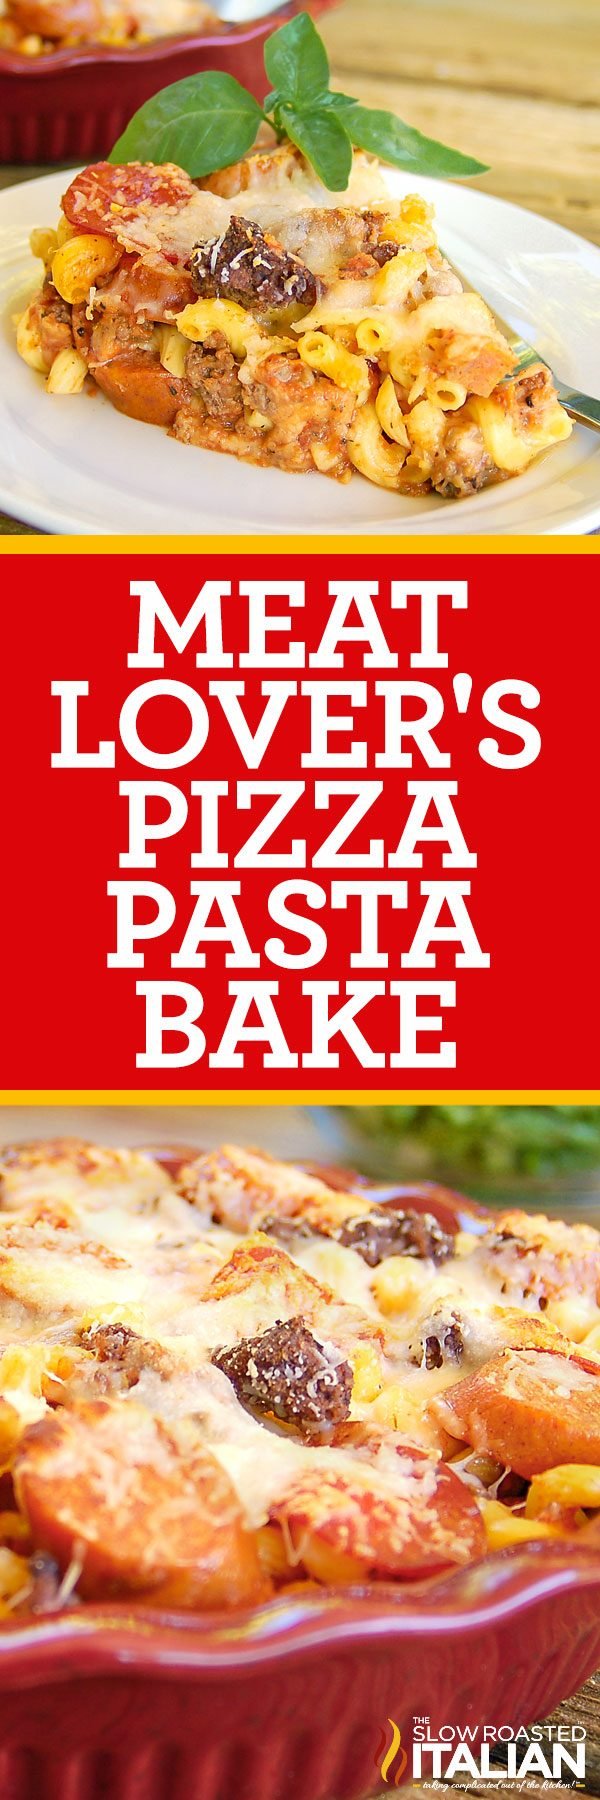 meat-lovers-pizza-pasta-bake-pin-7471156